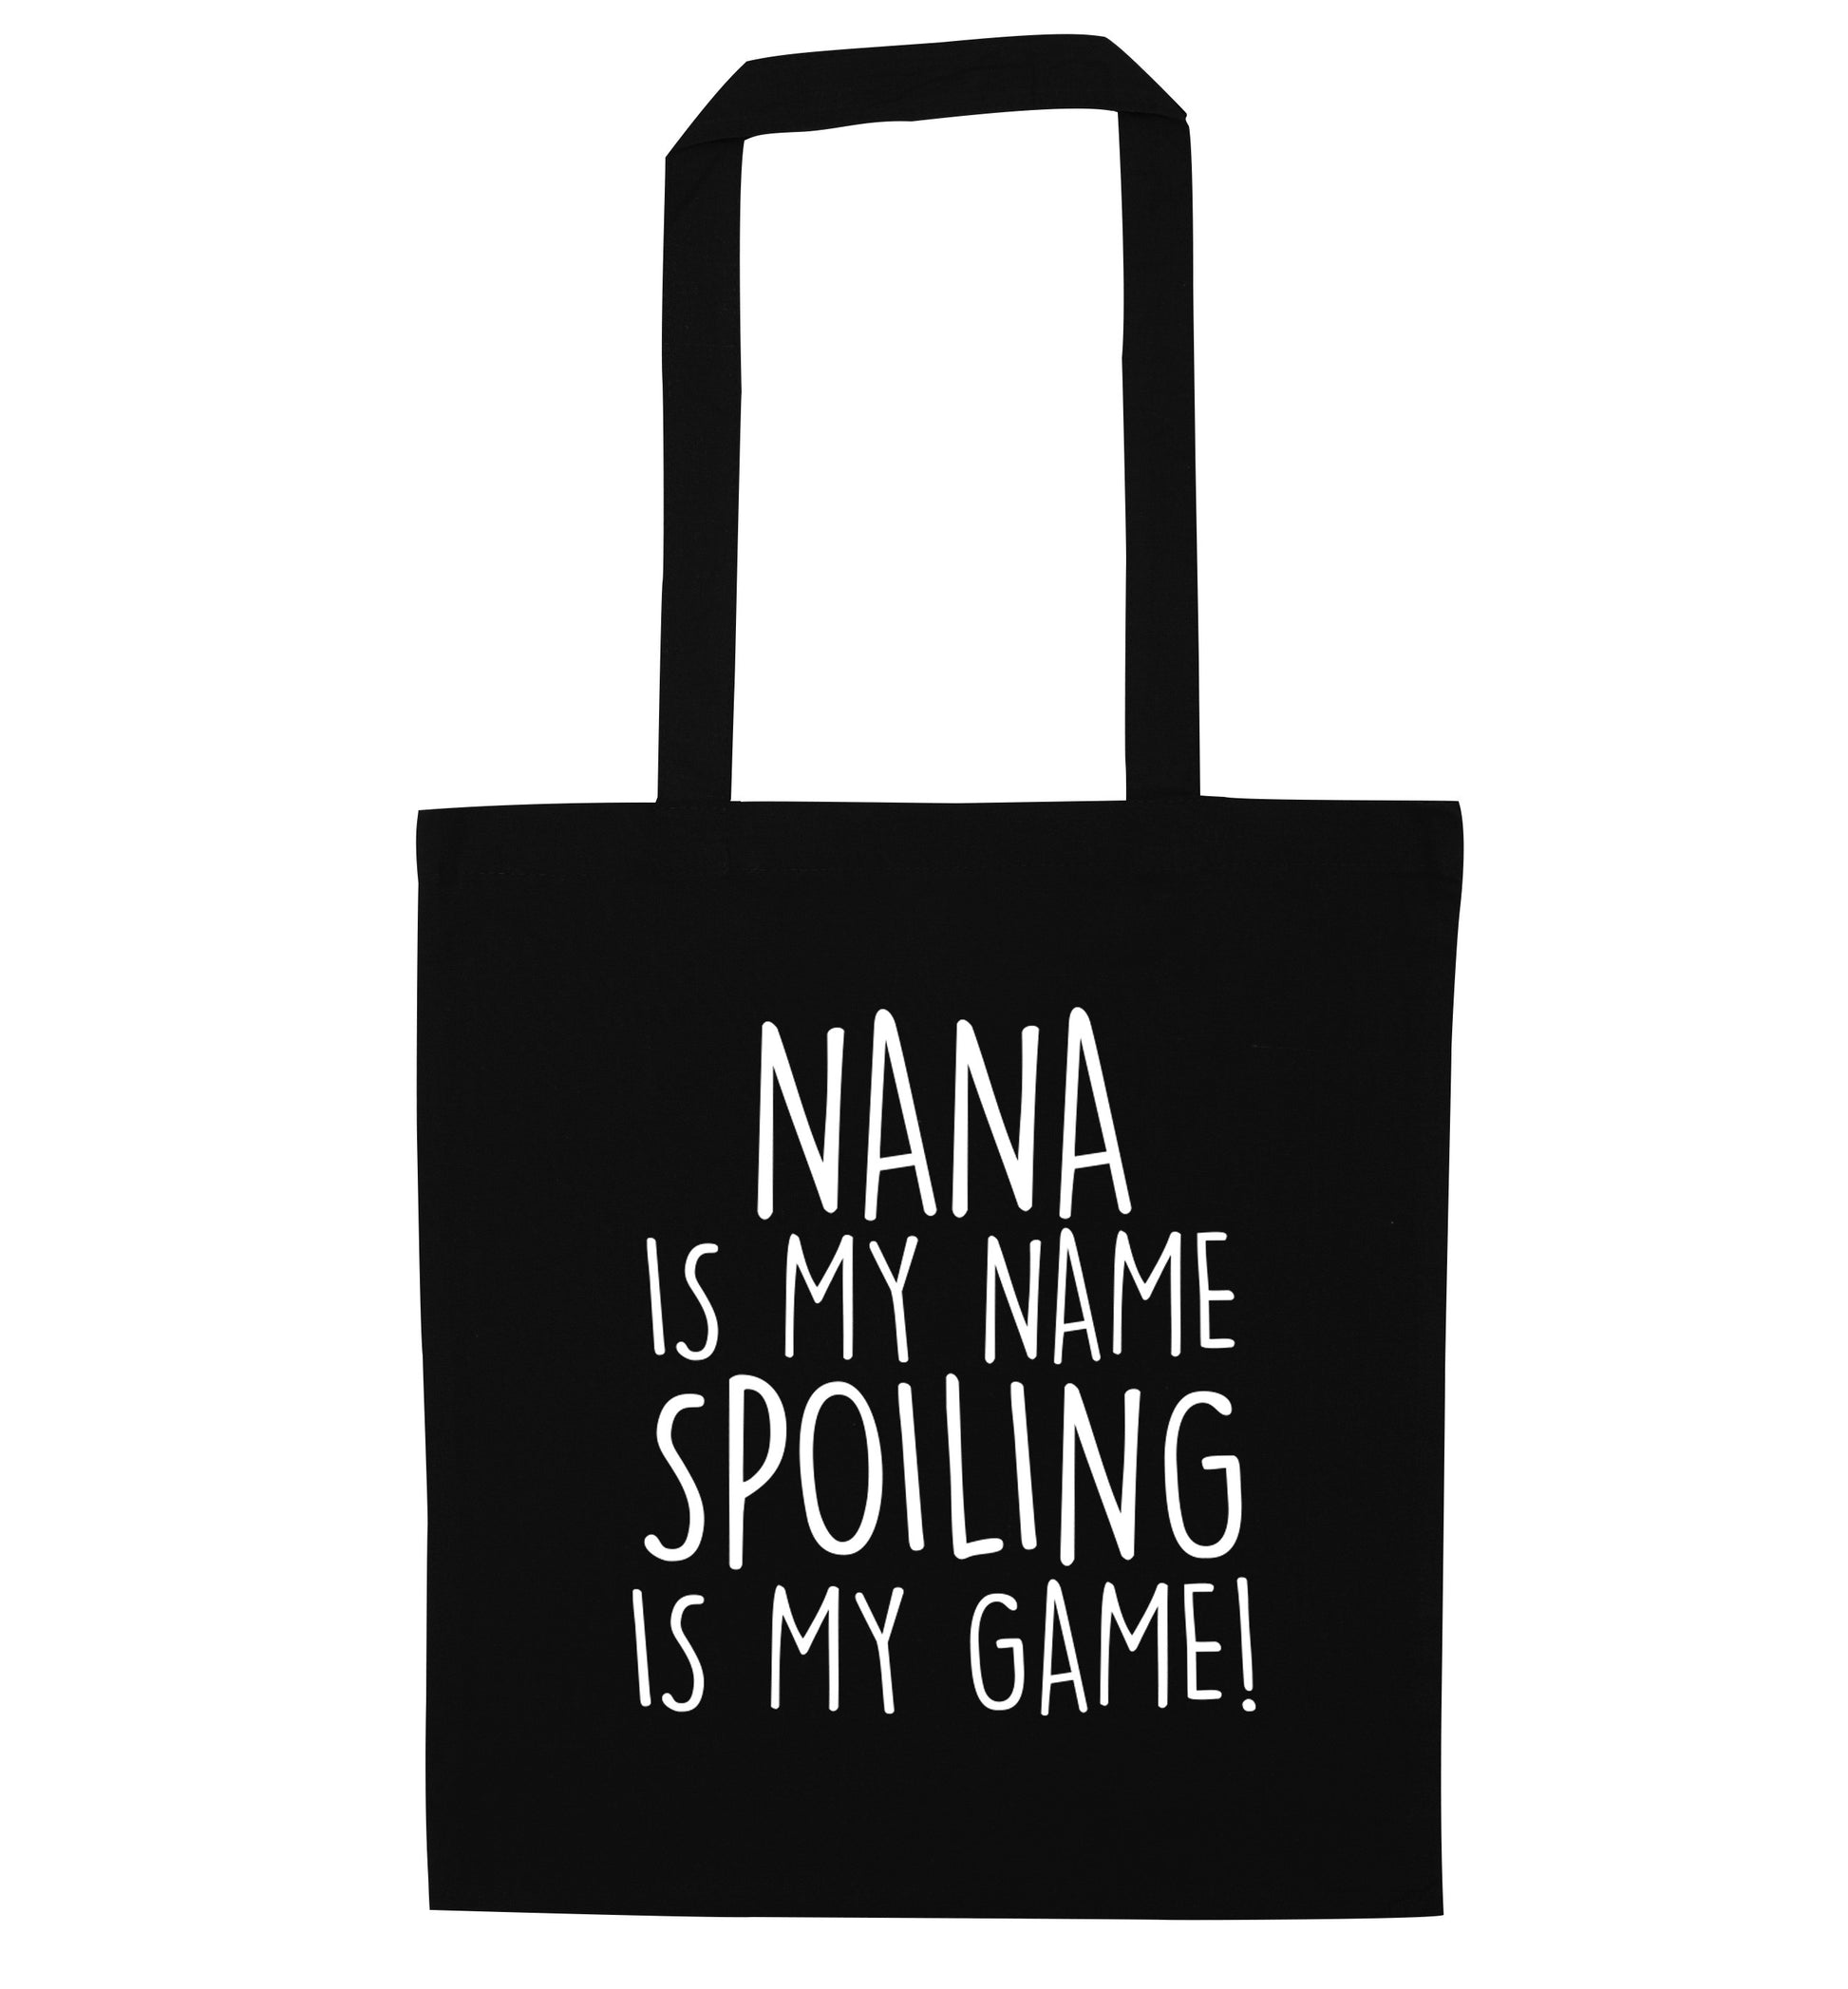 Nana is my name, spoiling is my game black tote bag